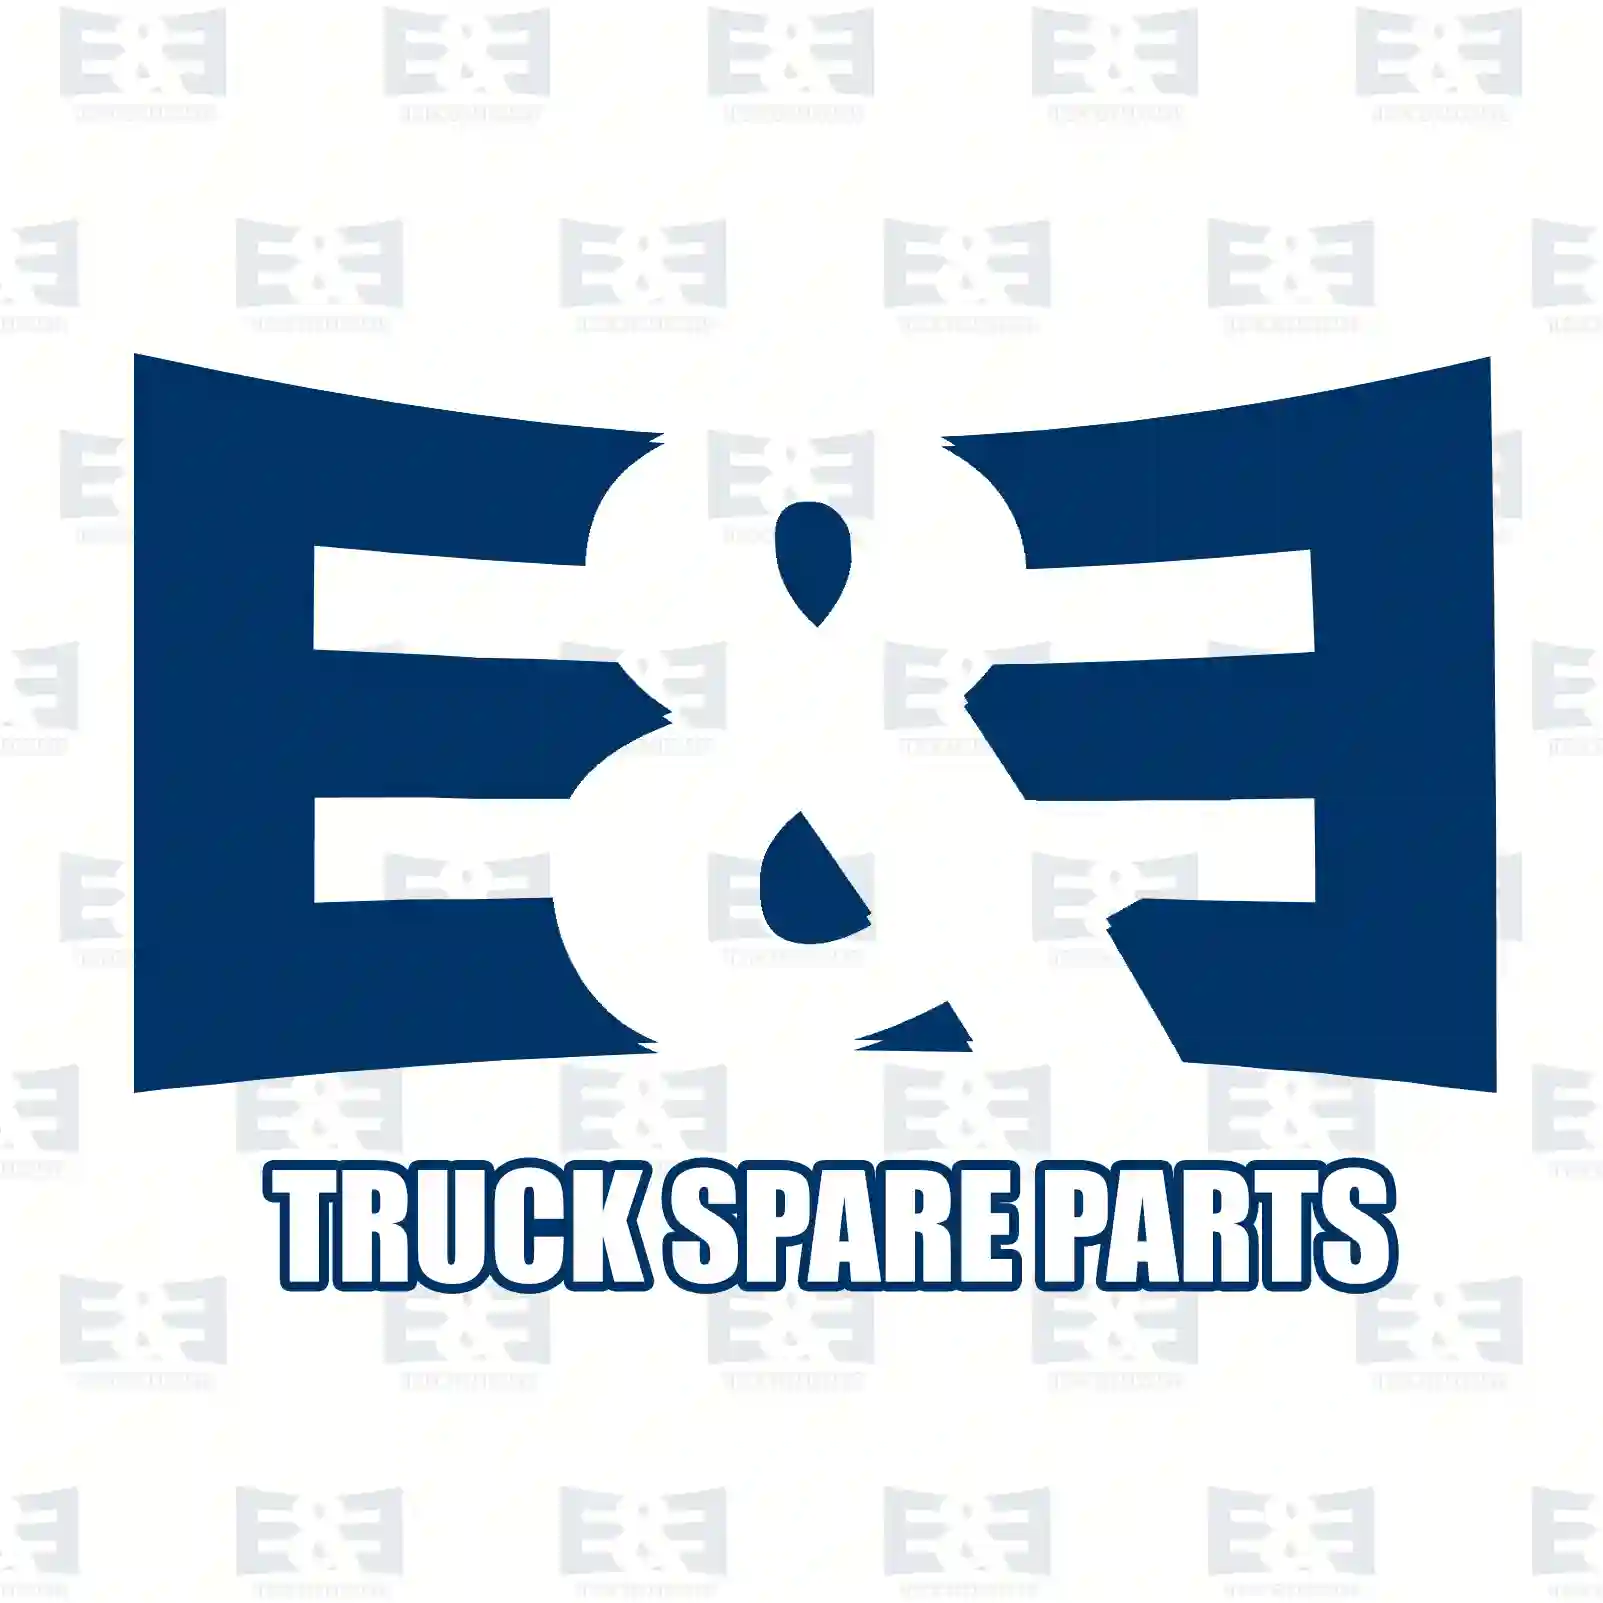  Headlamp, right, with adjusting motor || E&E Truck Spare Parts | Truck Spare Parts, Auotomotive Spare Parts